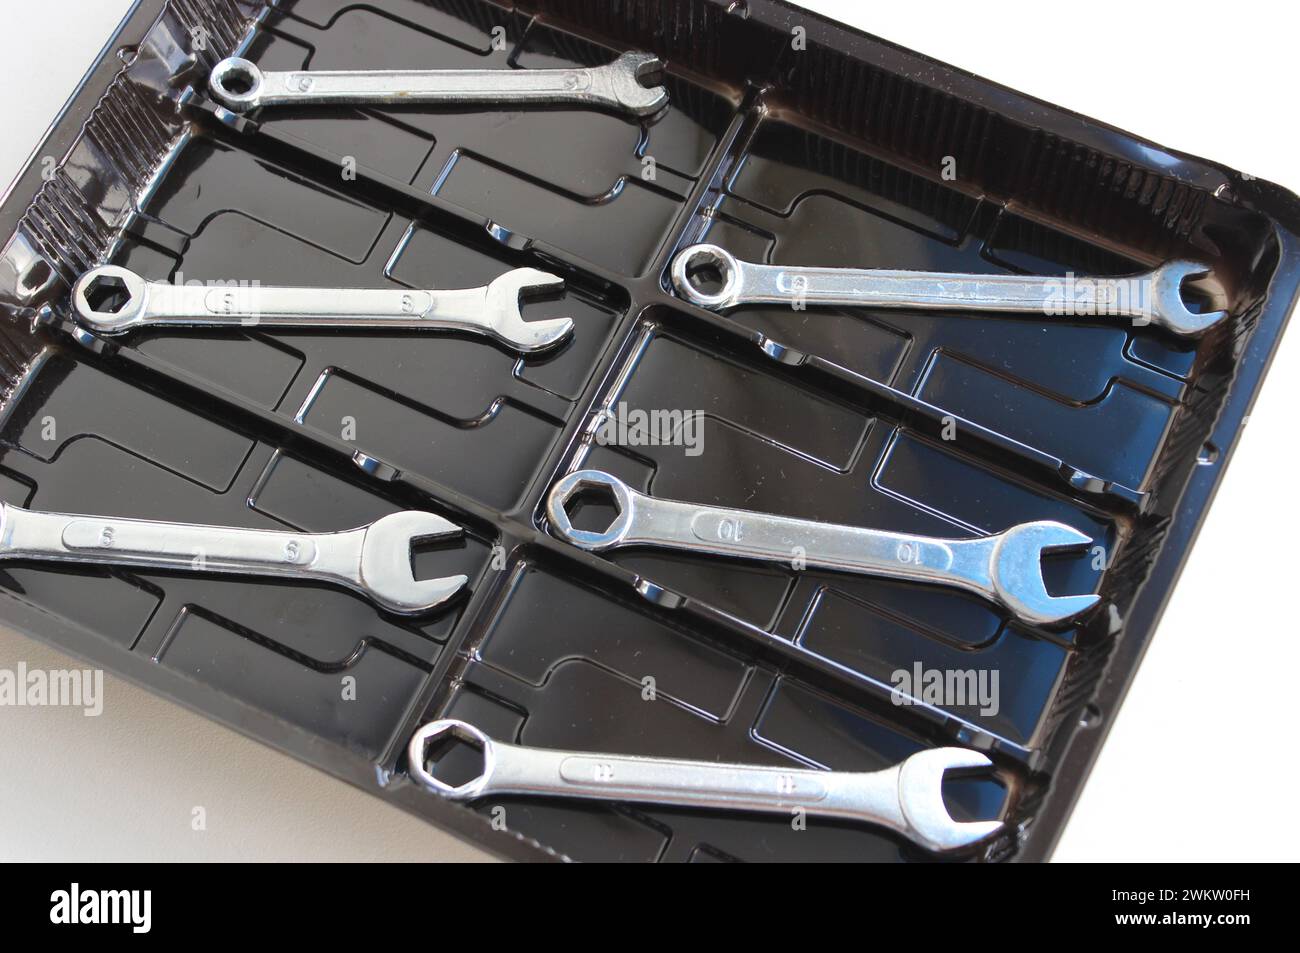 Iron Wrenches In Plastic Tray Arranged In Ascending Size Stock Photo